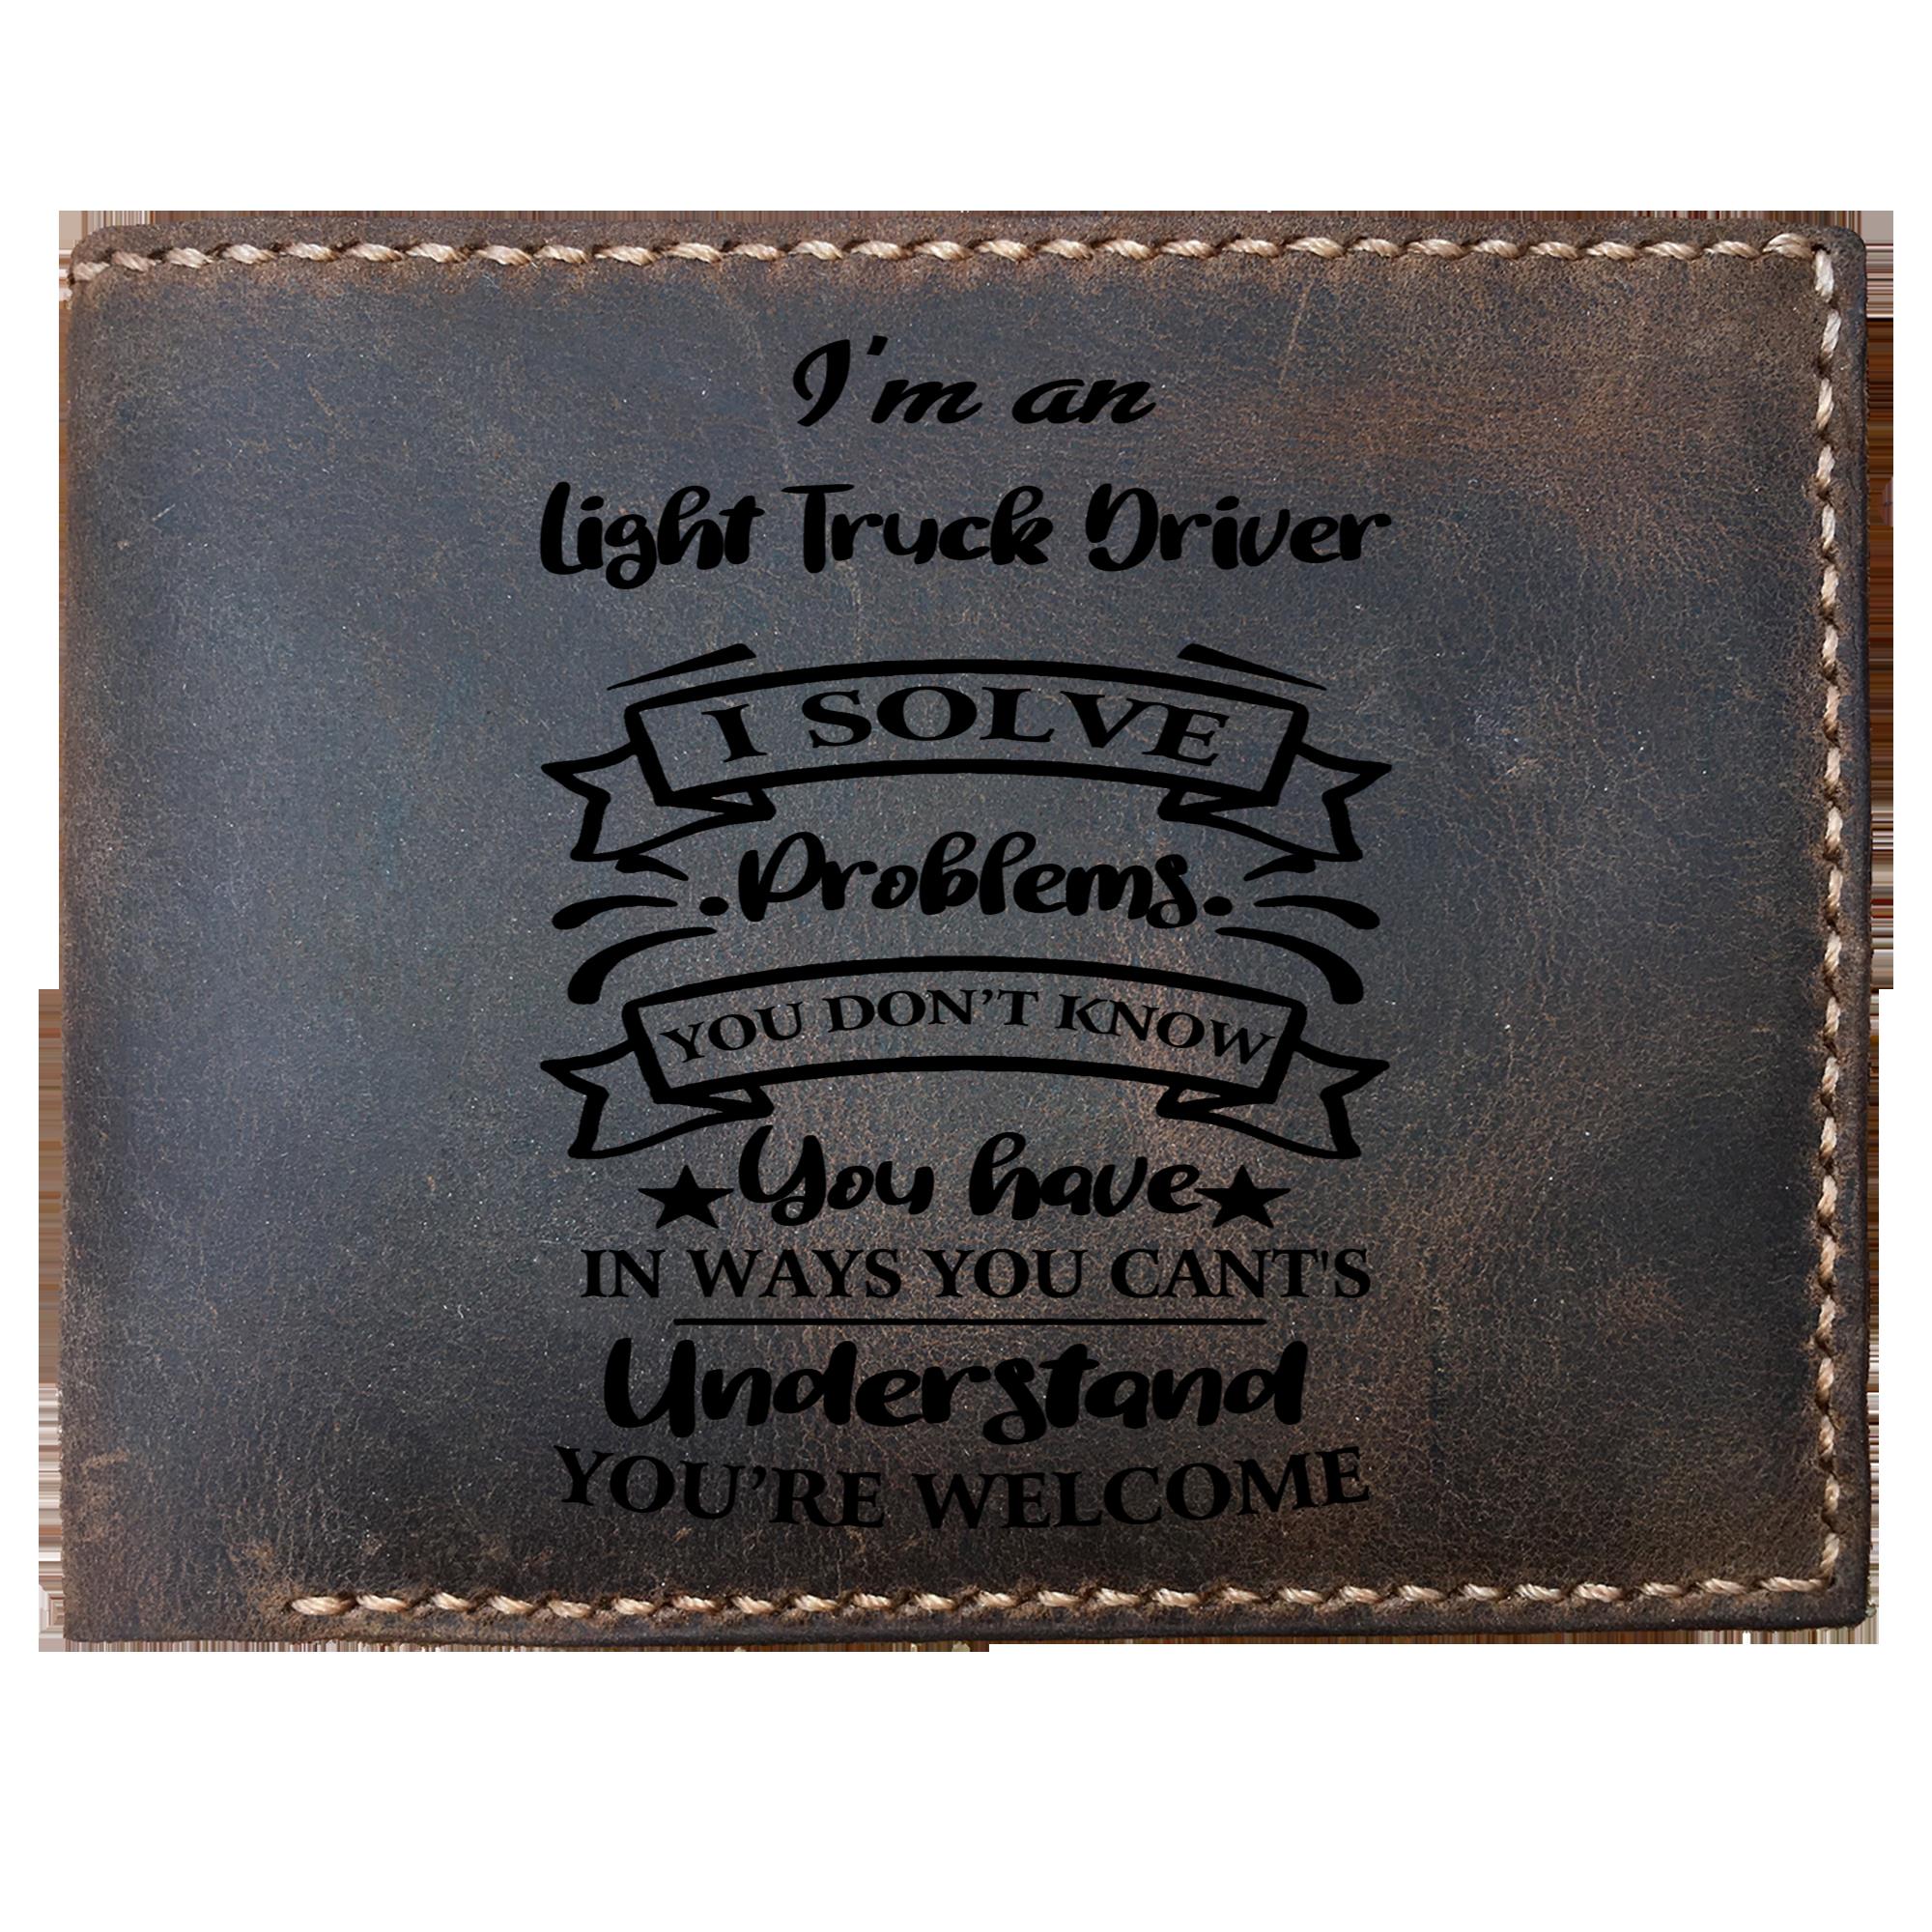 Skitongifts Funny Custom Laser Engraved Bifold Leather Wallet For Men, I'm an Light Truck Driver Solve Problems, Father's Day Gifts